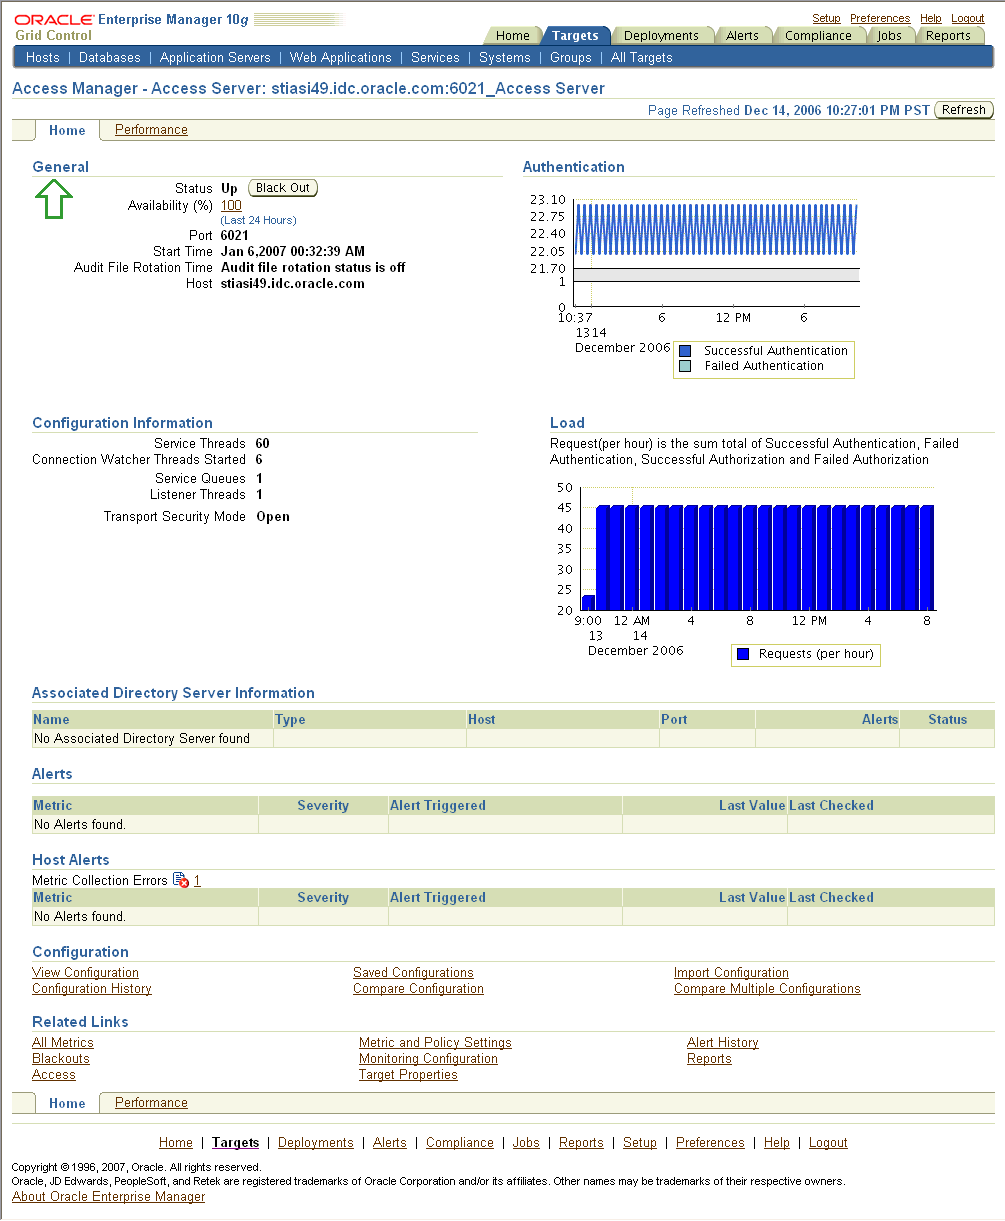 Access Server Home Page